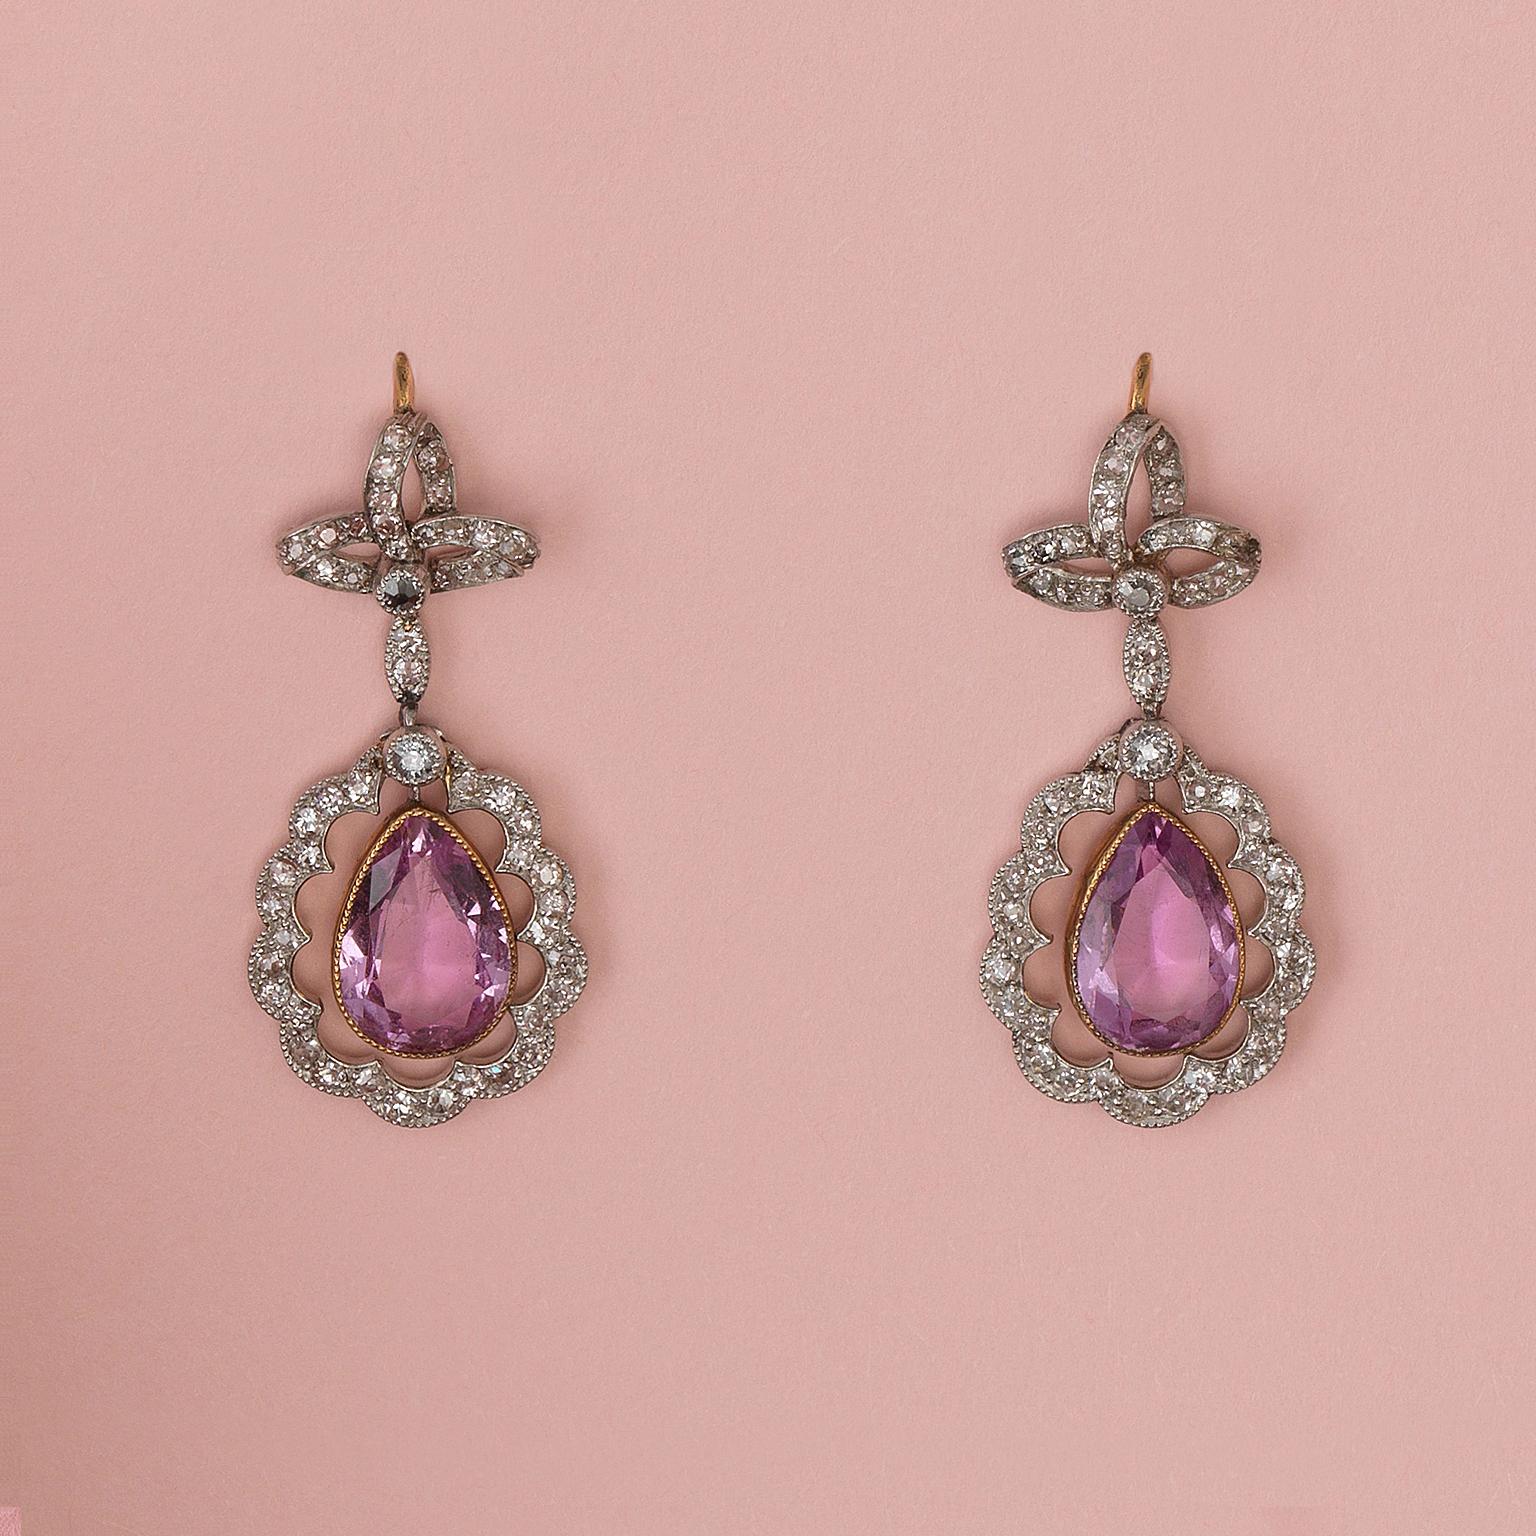 A delicate pair of platinum Edwardian earrings with a little bow set with rose cut diamonds with suspending below a drop shaped pink topaz with rose cut diamonds surround, England, circa 1910.

measurements topaz: 1 x 0.7 cm
weight: 5.23